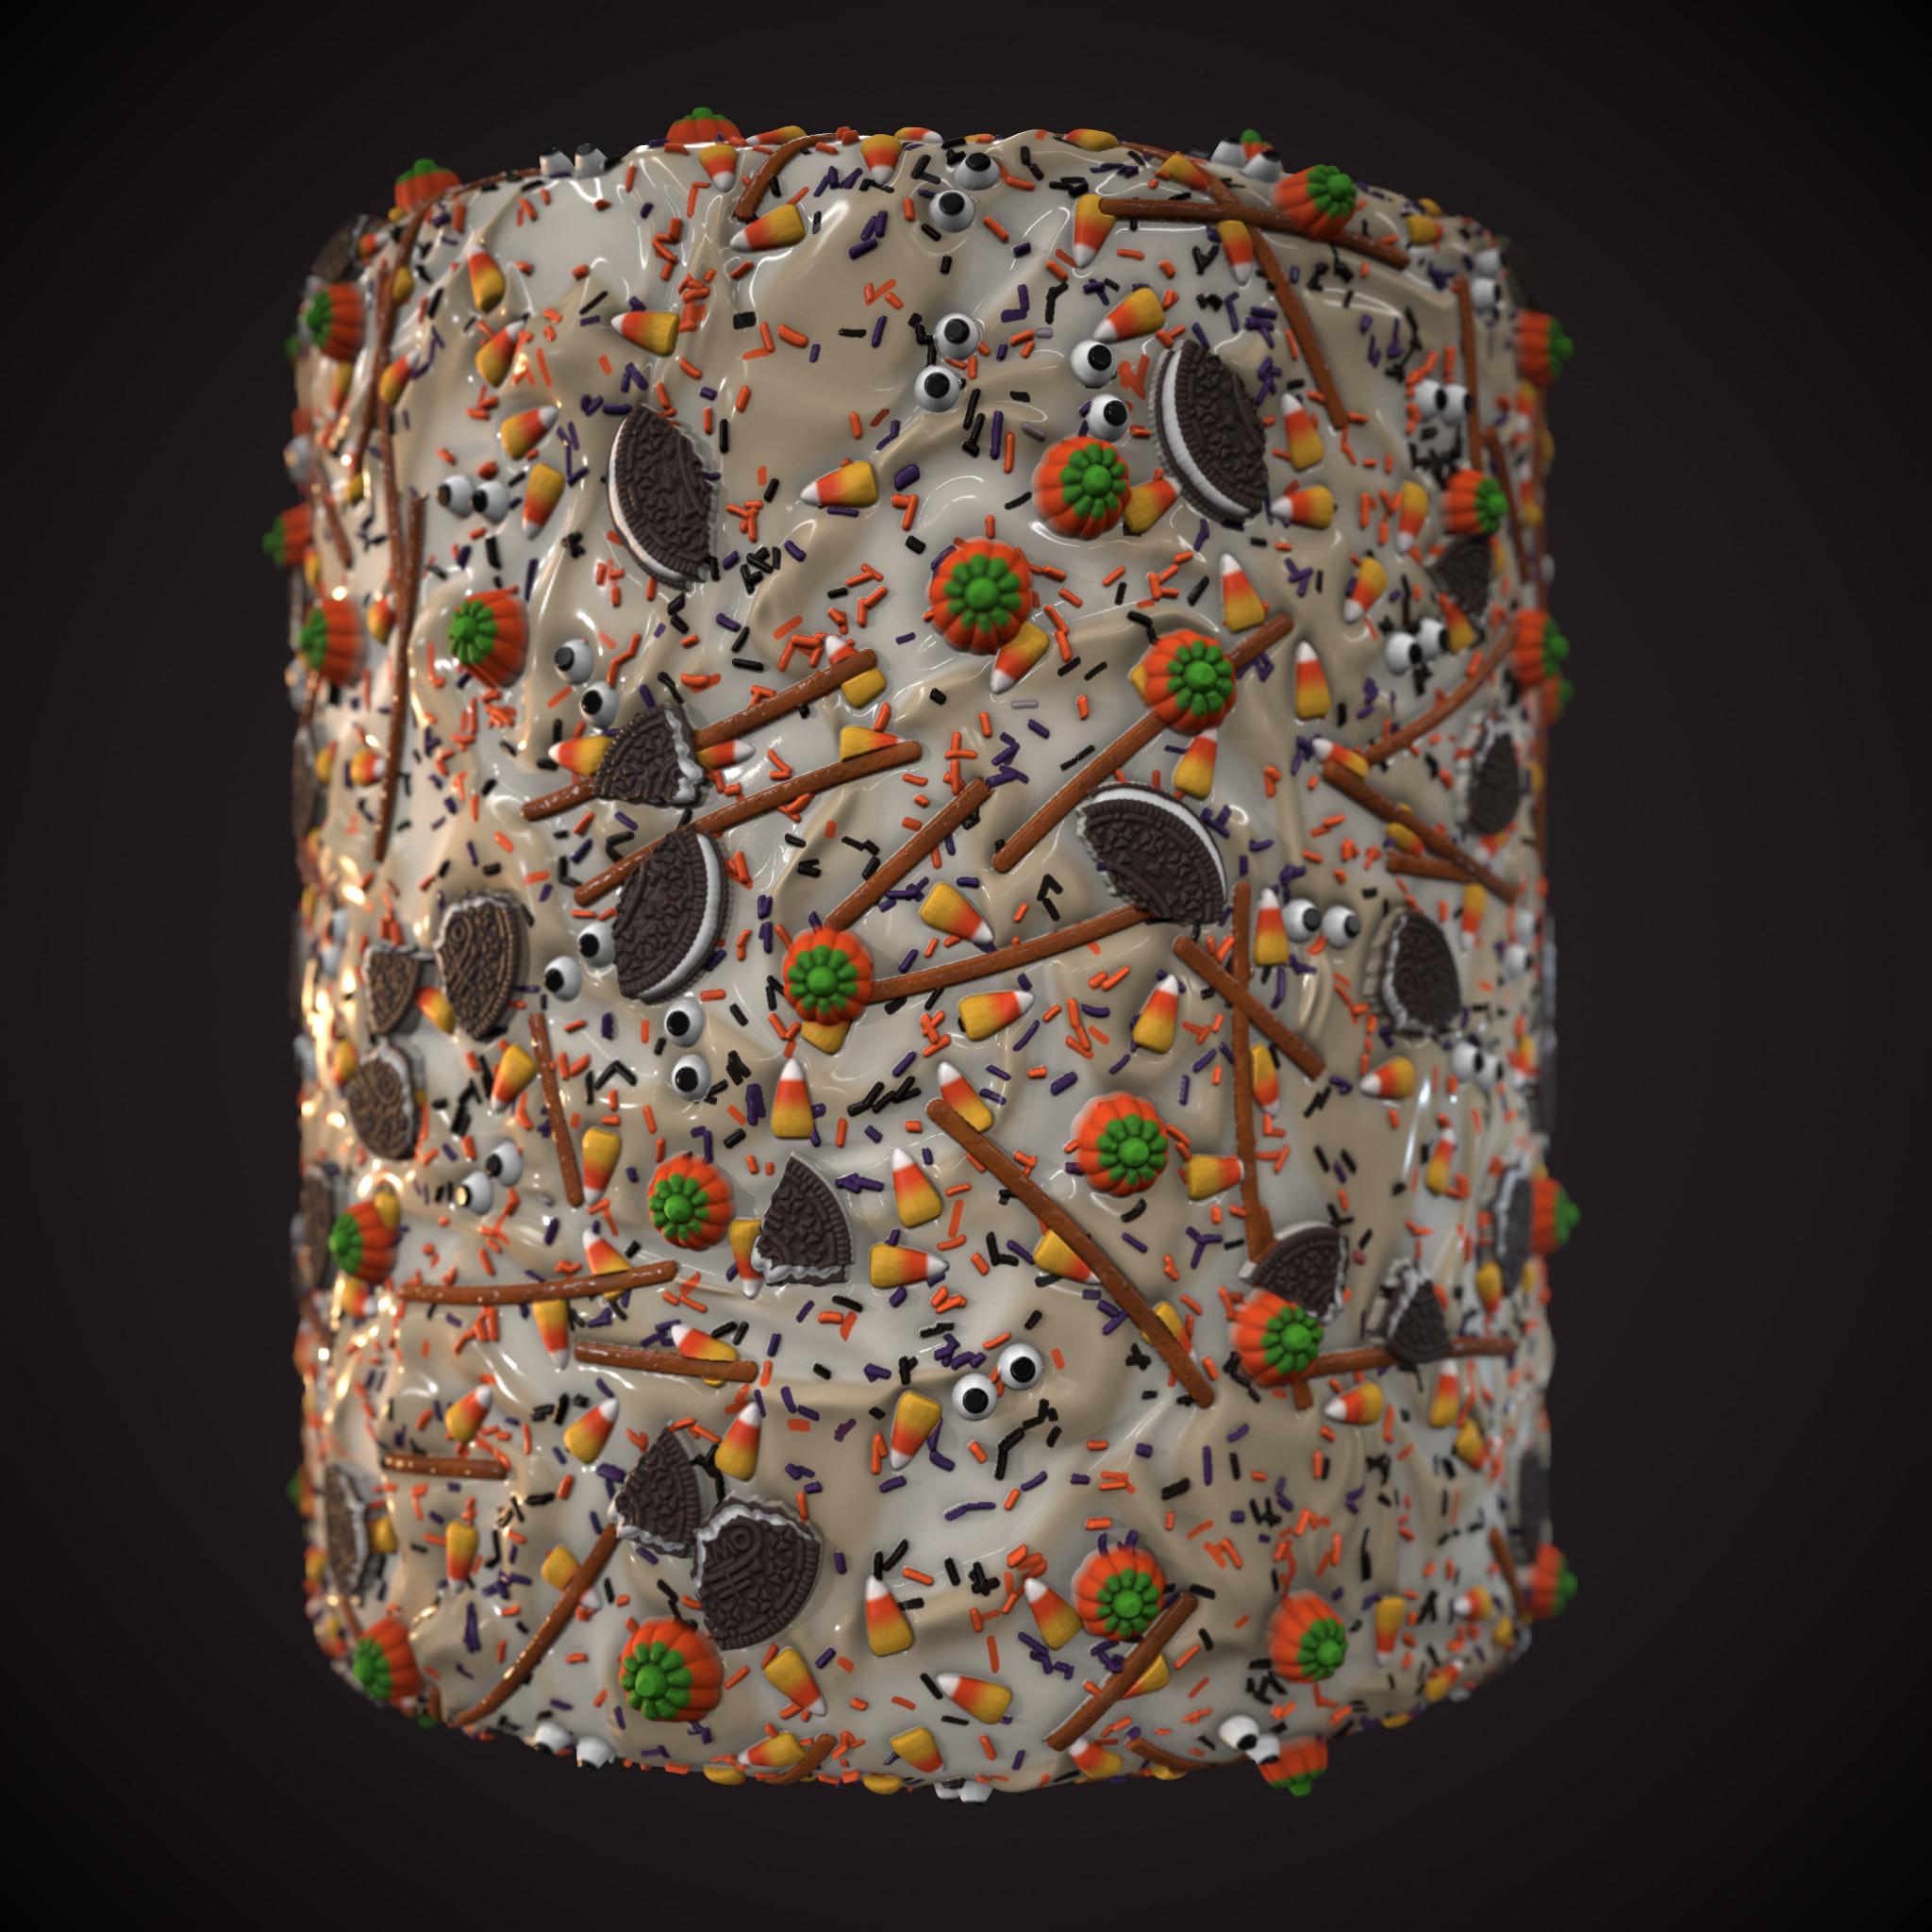 Cylinder Render. Yes the cookies say "Oweo" 